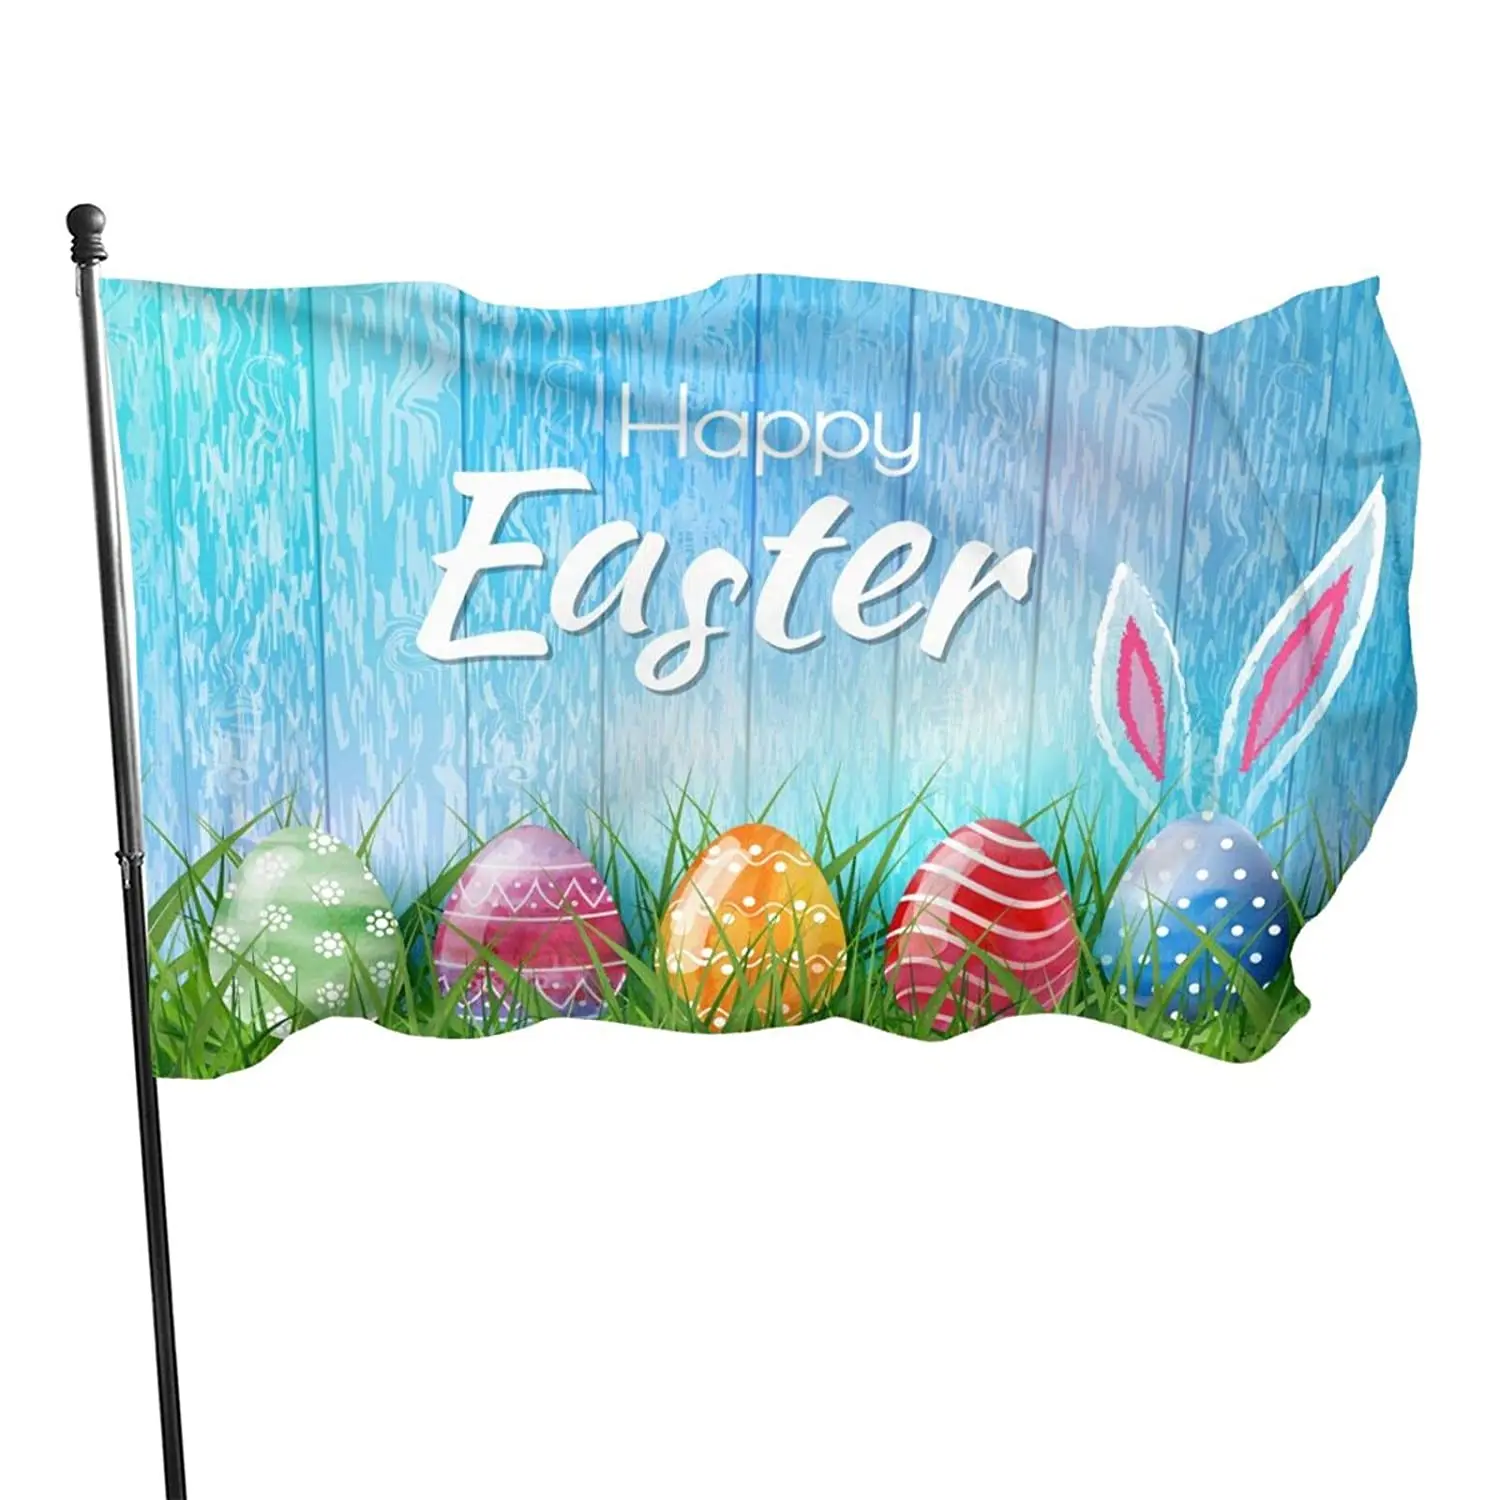 

Happy Easter Colorful Easter Egg Bunny Grass Flag Garden Yard House Flags Indoor and Outdoor Sport Decoration